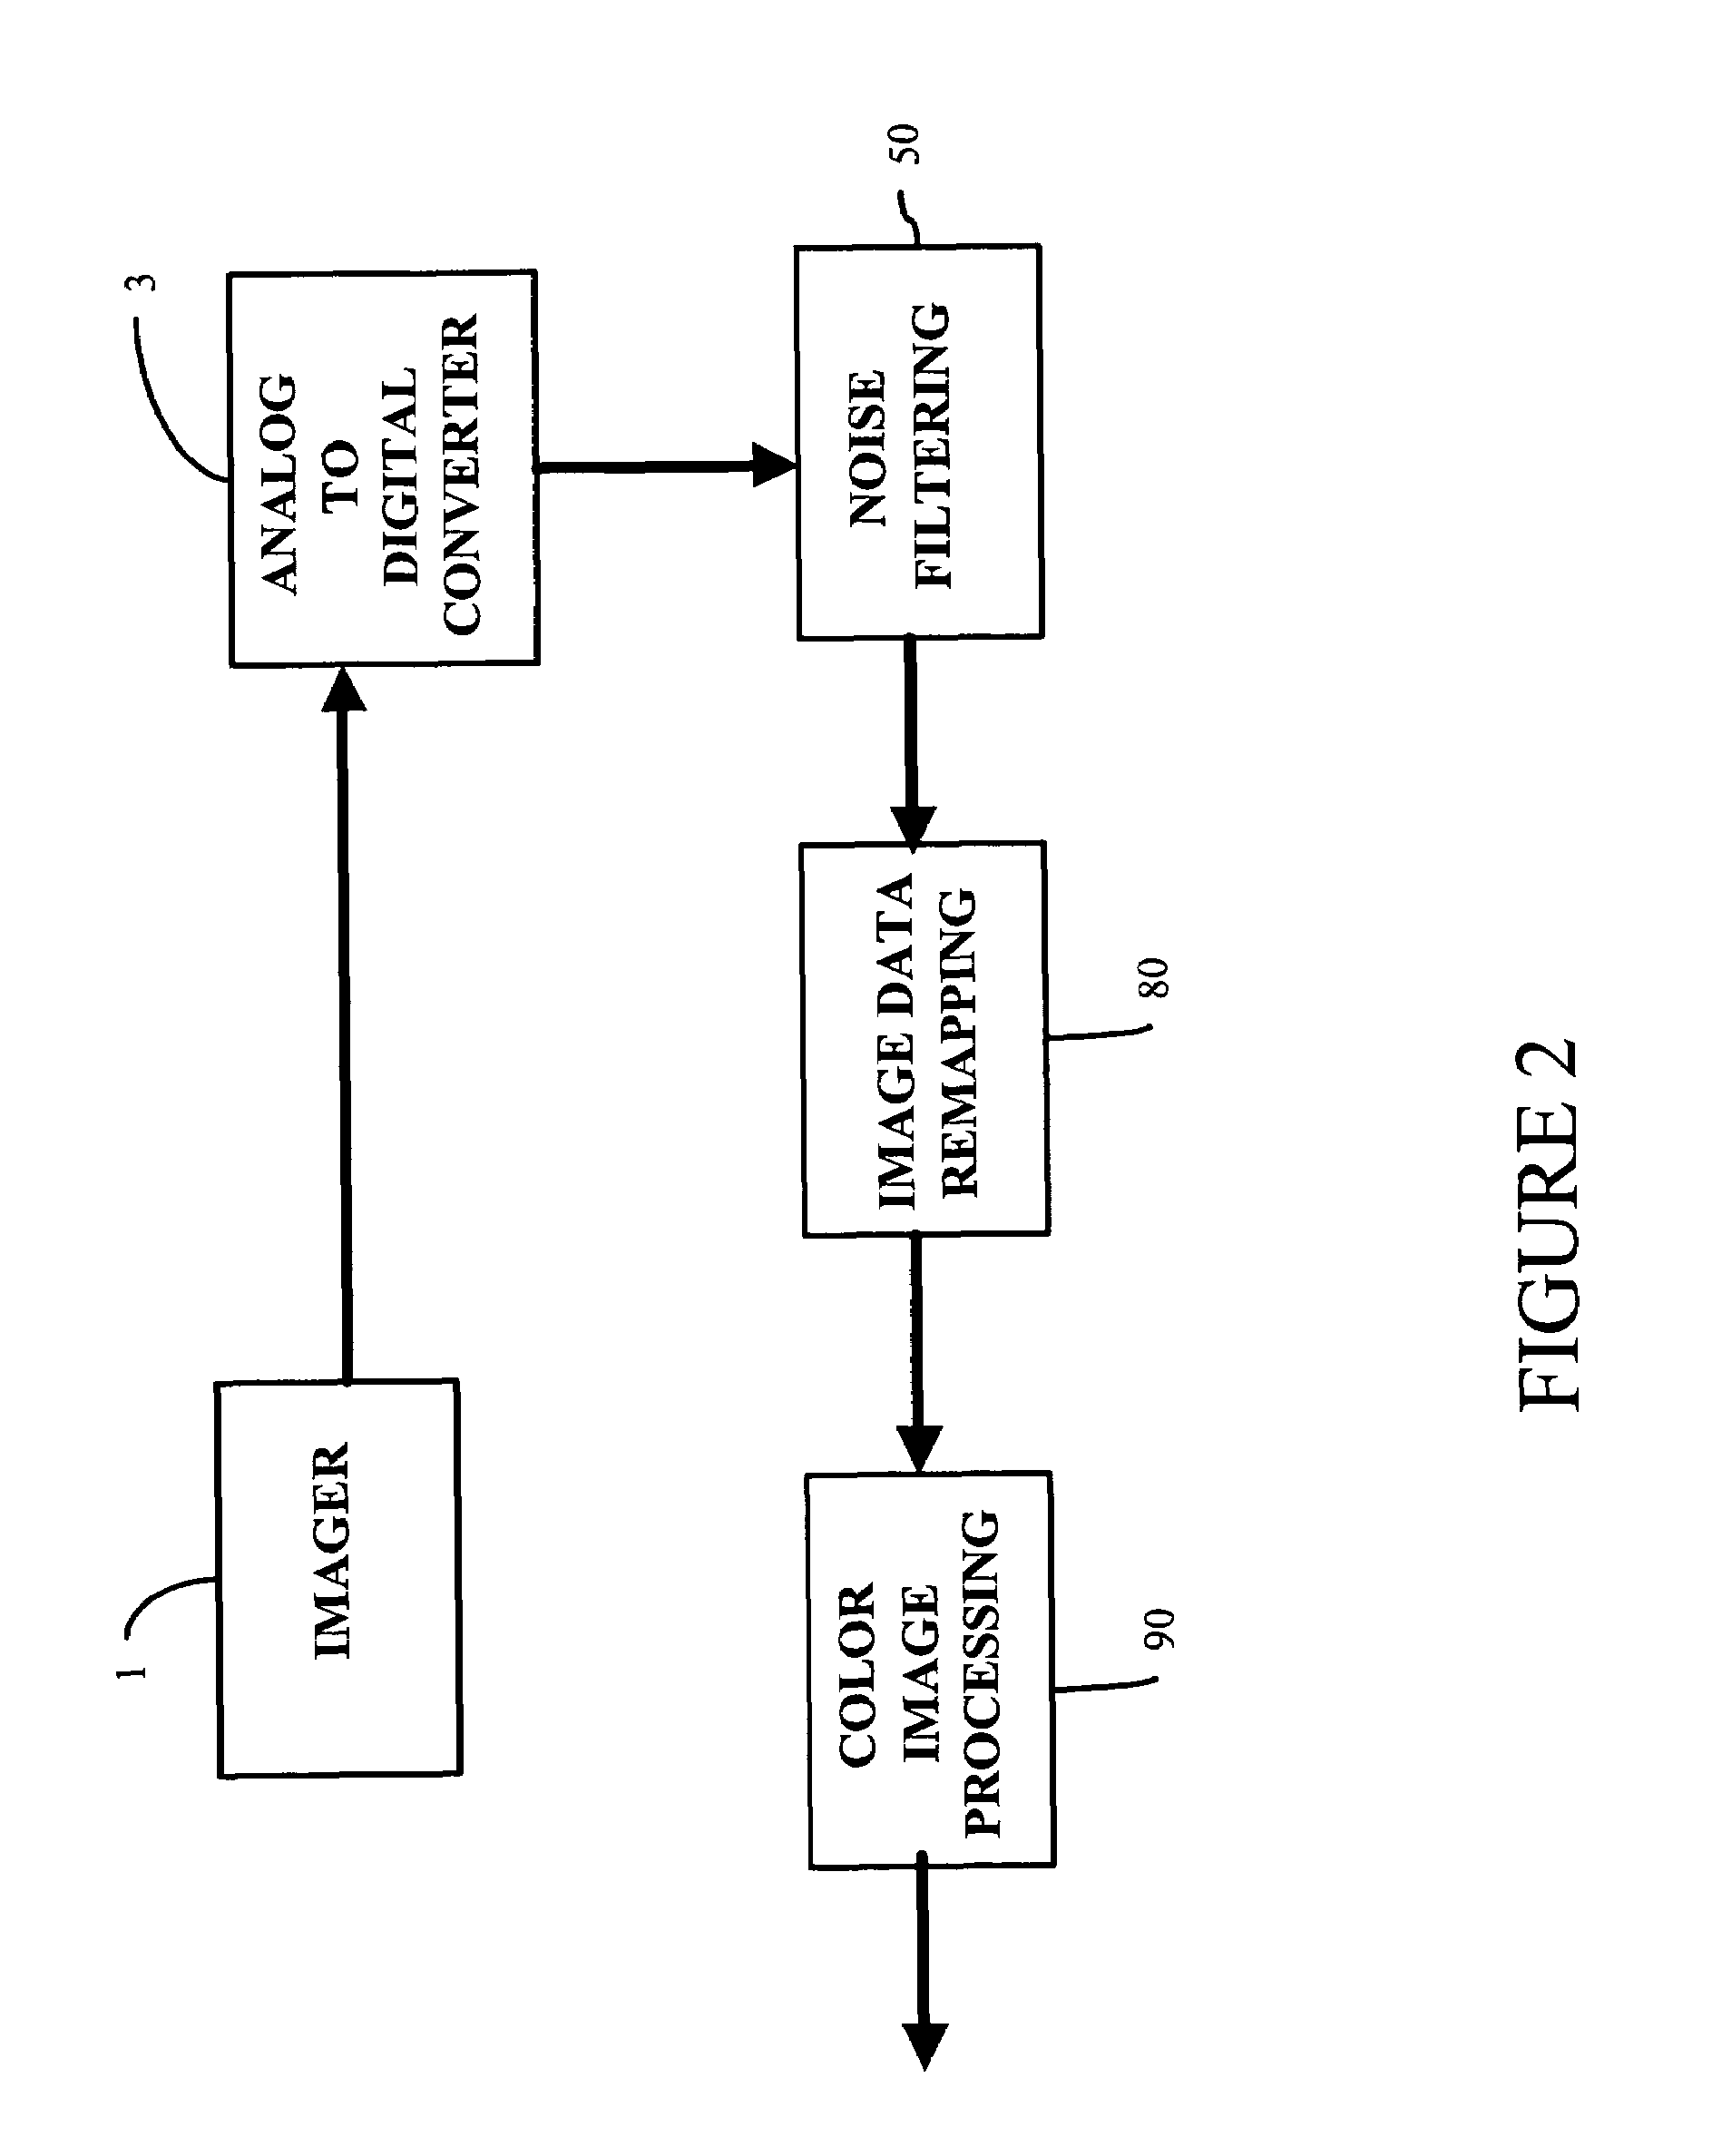 System and method for processing non-linear image data from a digital imager